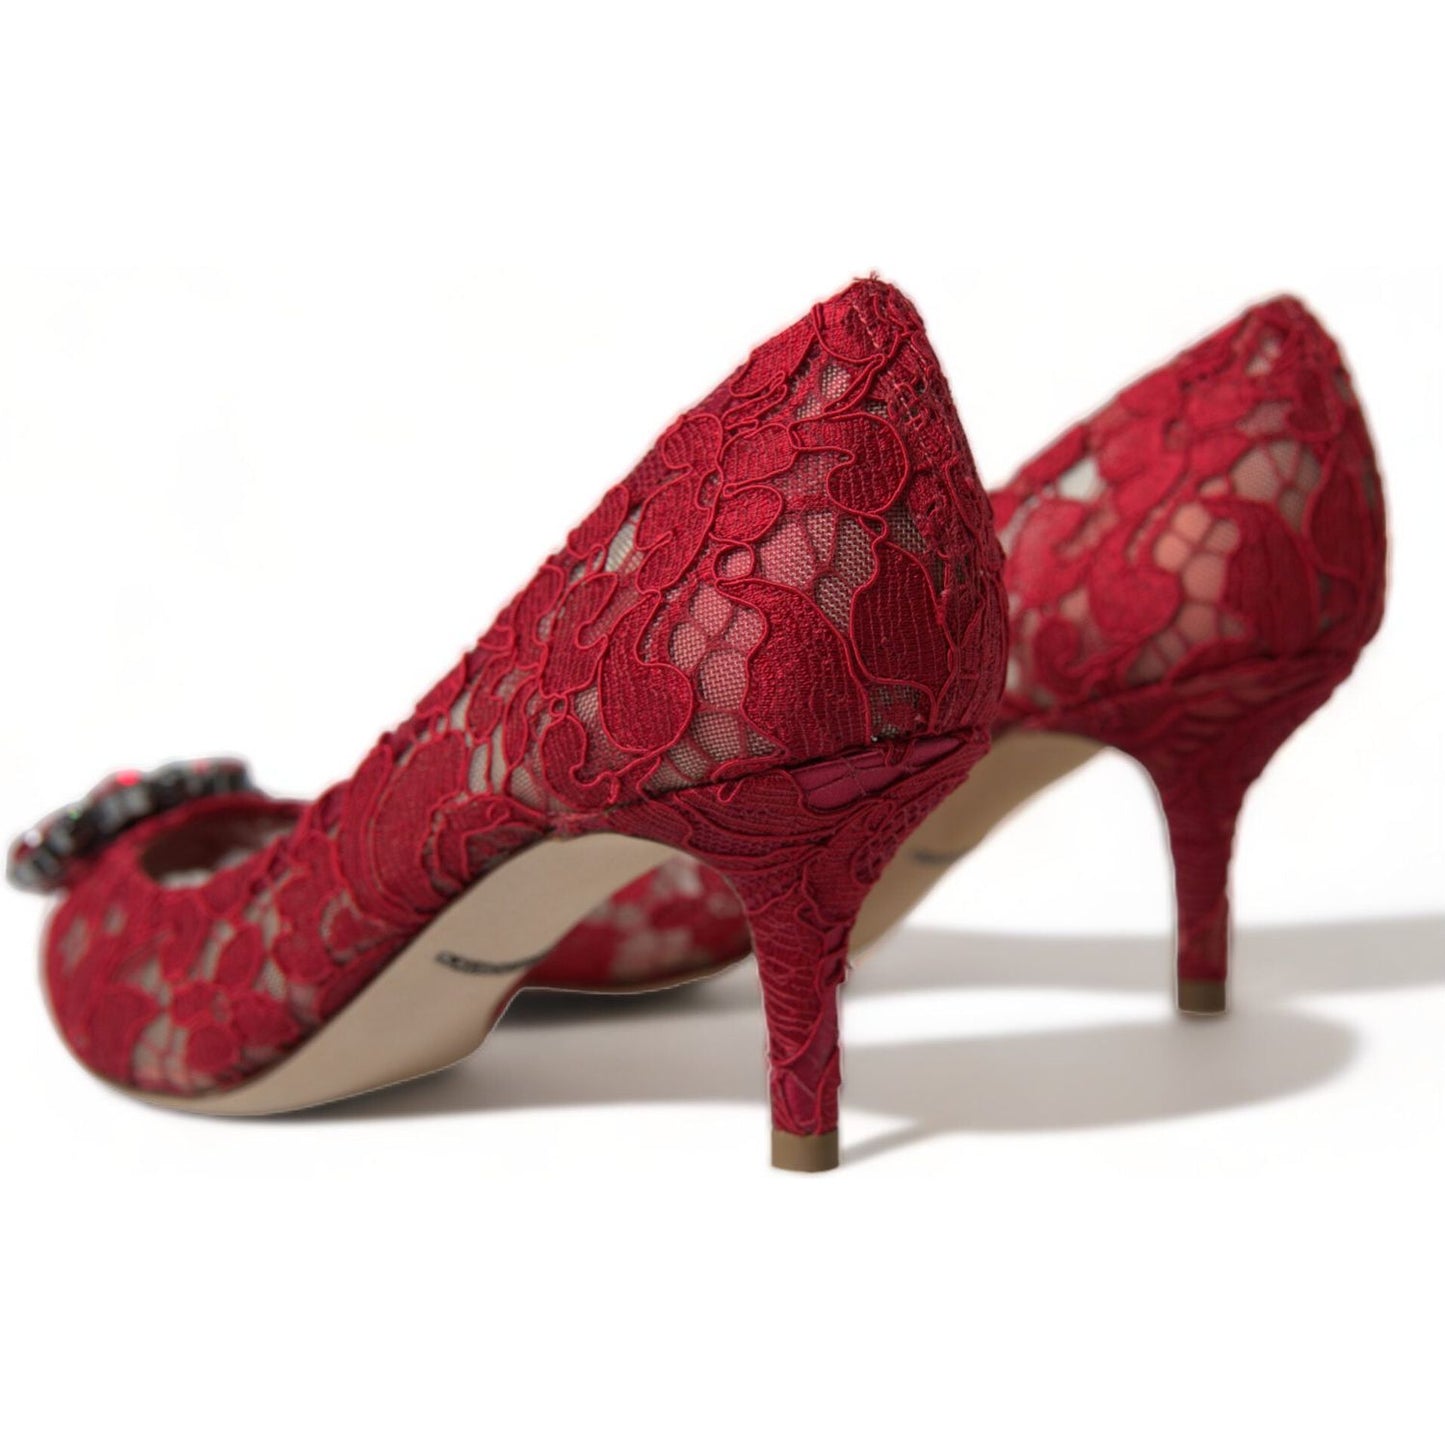 Dolce & Gabbana Radiant Red Lace Heels with Crystals red-taormina-lace-crystal-heels-pumps-shoes-2 465A9598-bg-scaled-57880158-2fc.jpg